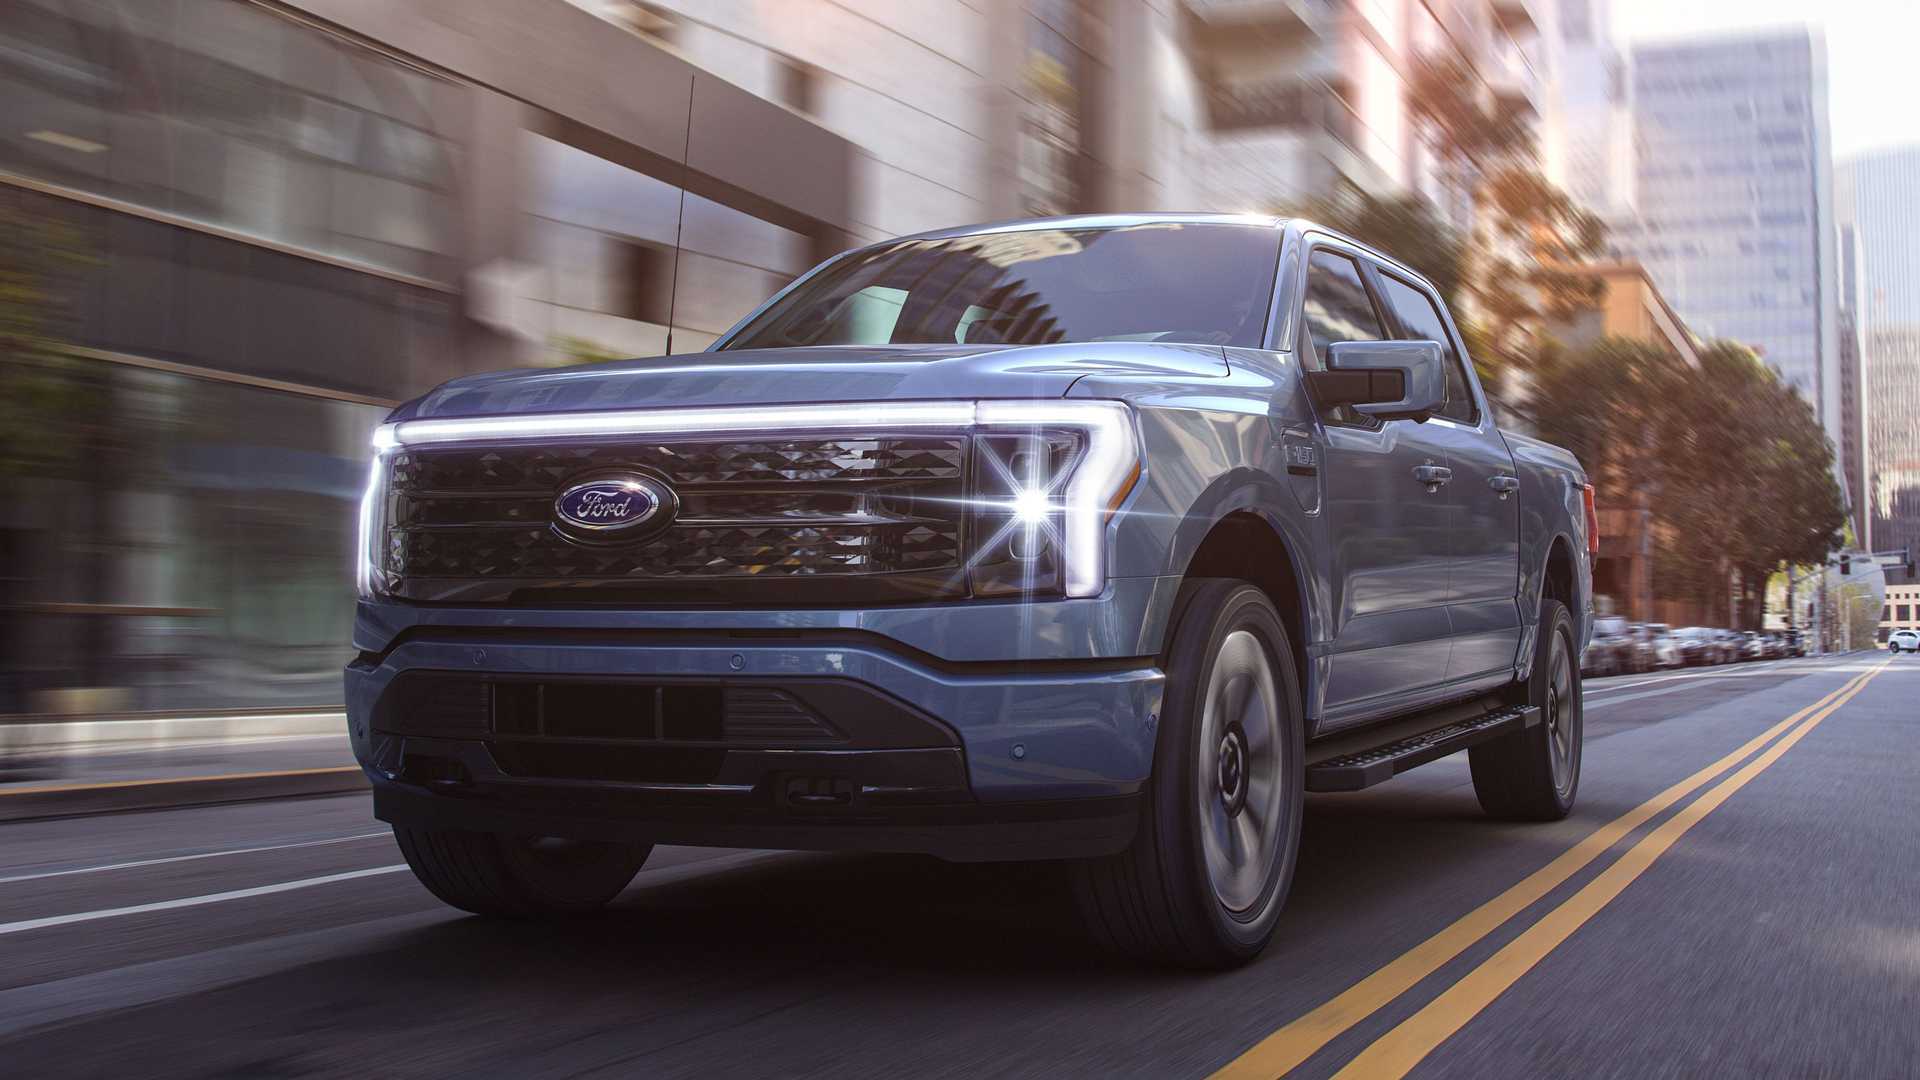 ford f150 electric pricing